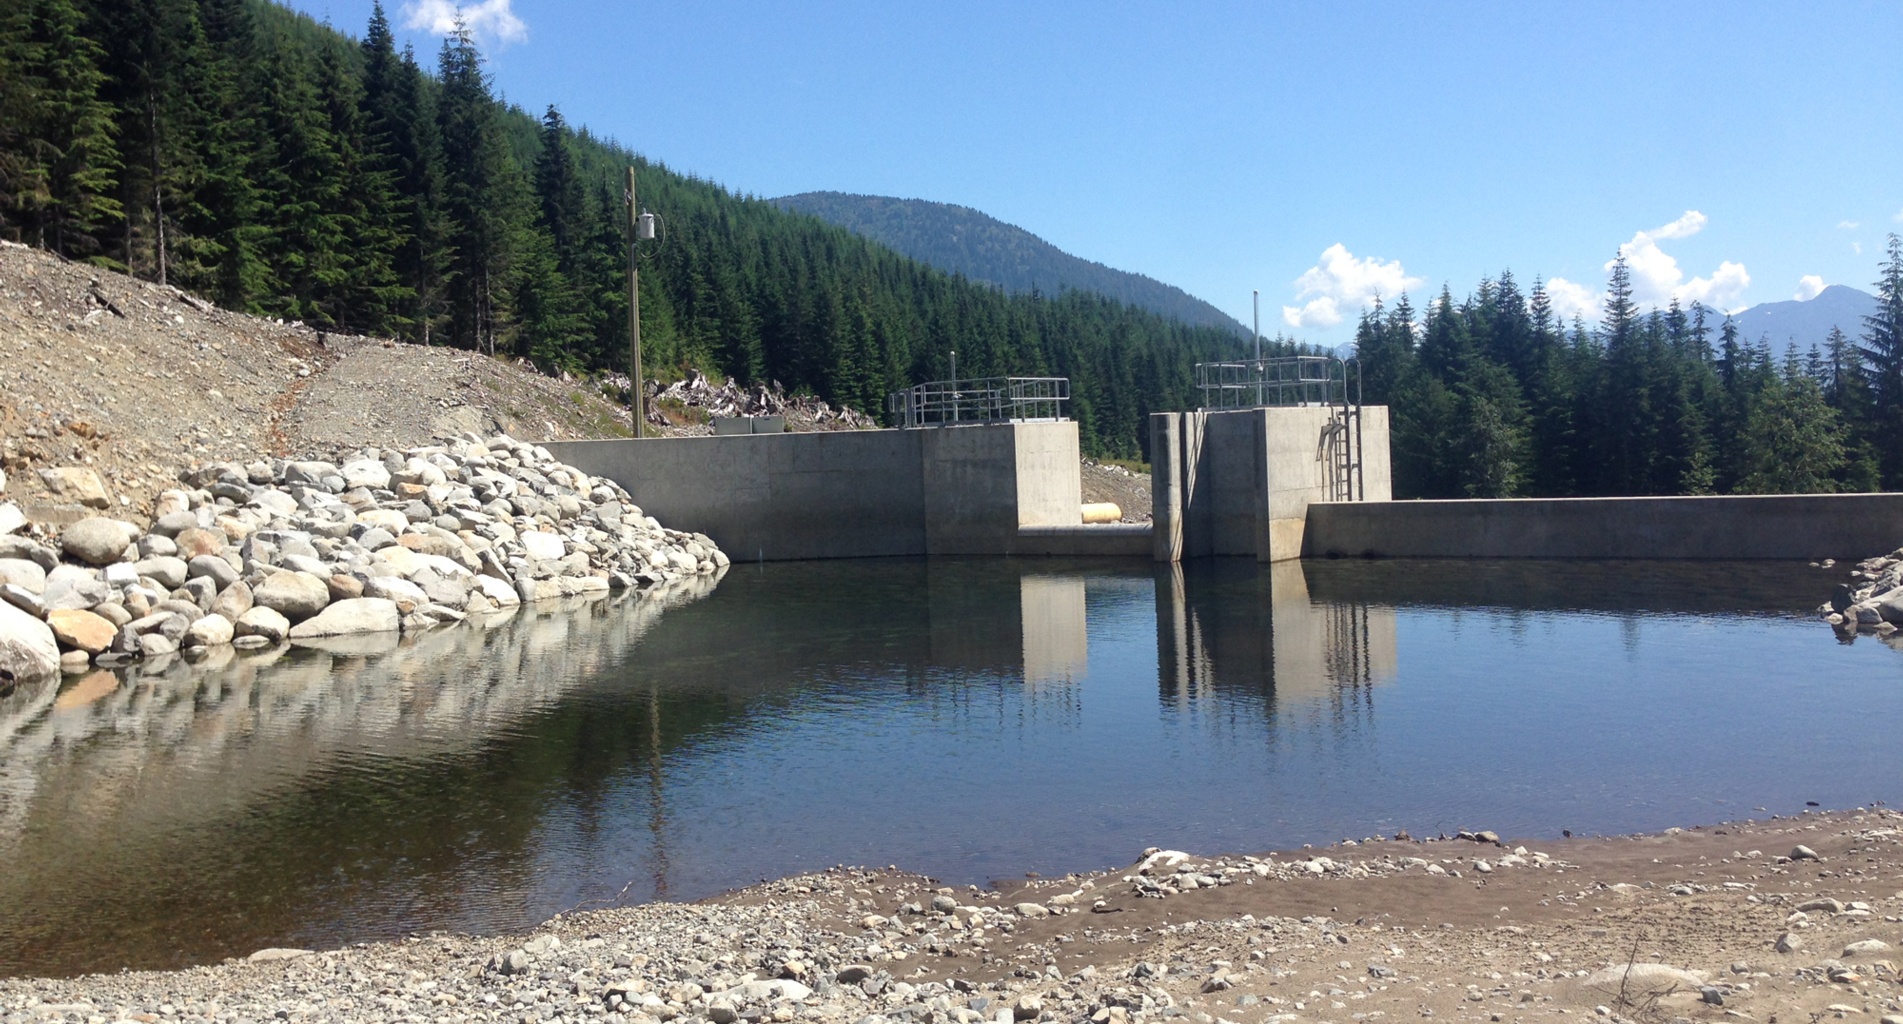 Box Canyon Hydroelectric Project Recognized with Two Canadian Consulting Engineering Awards